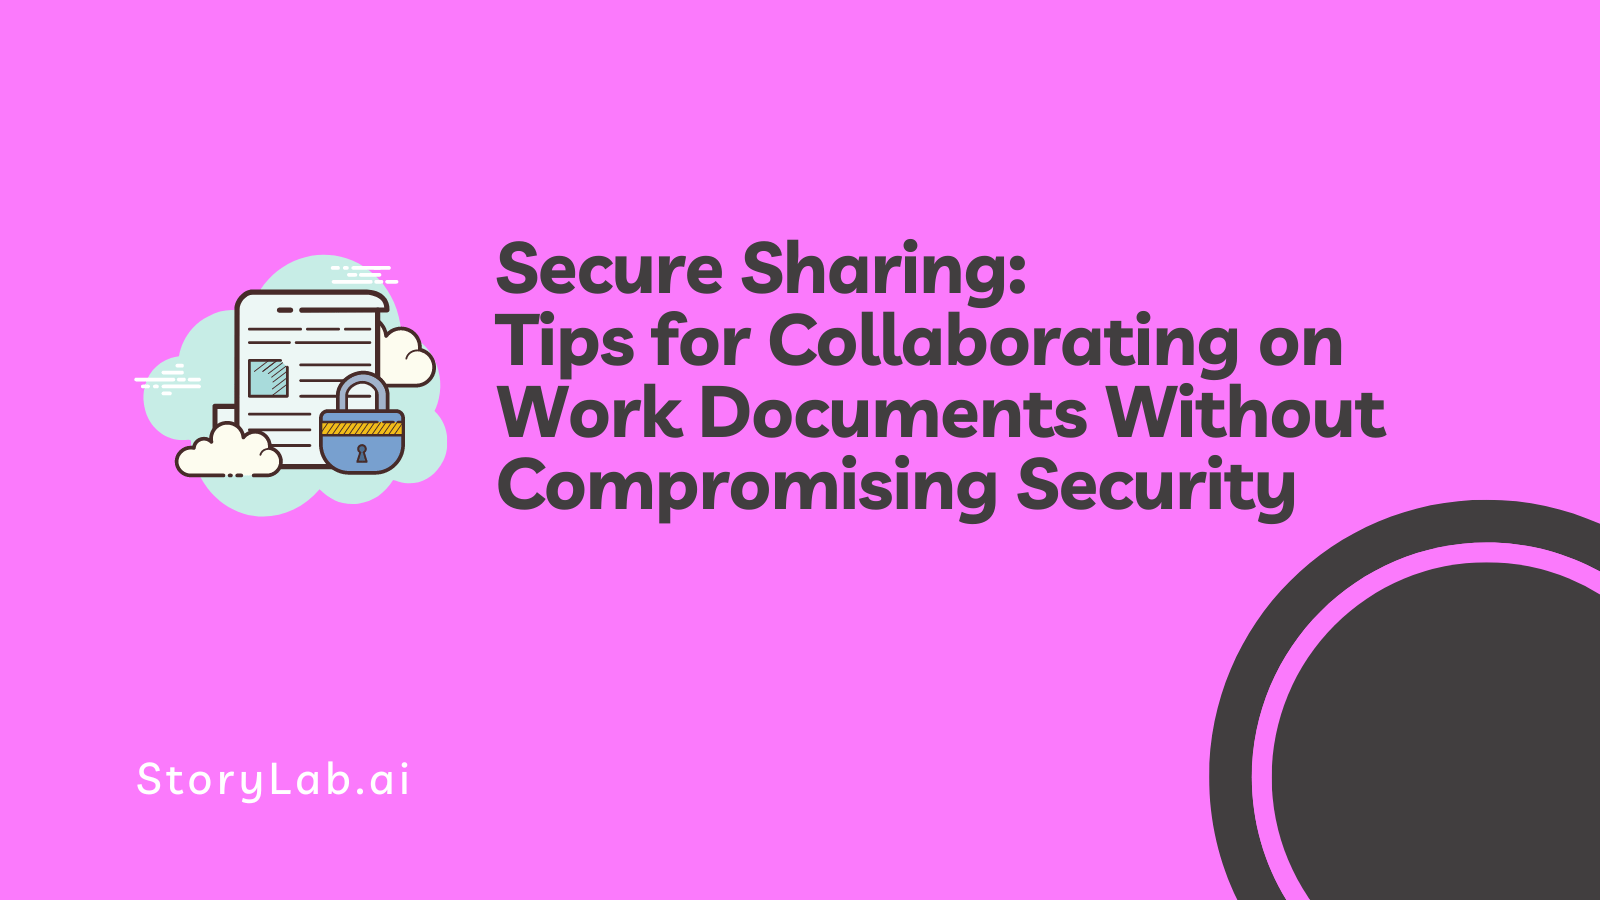 Secure Sharing Tips for Collaborating on Work Documents Without Compromising Security